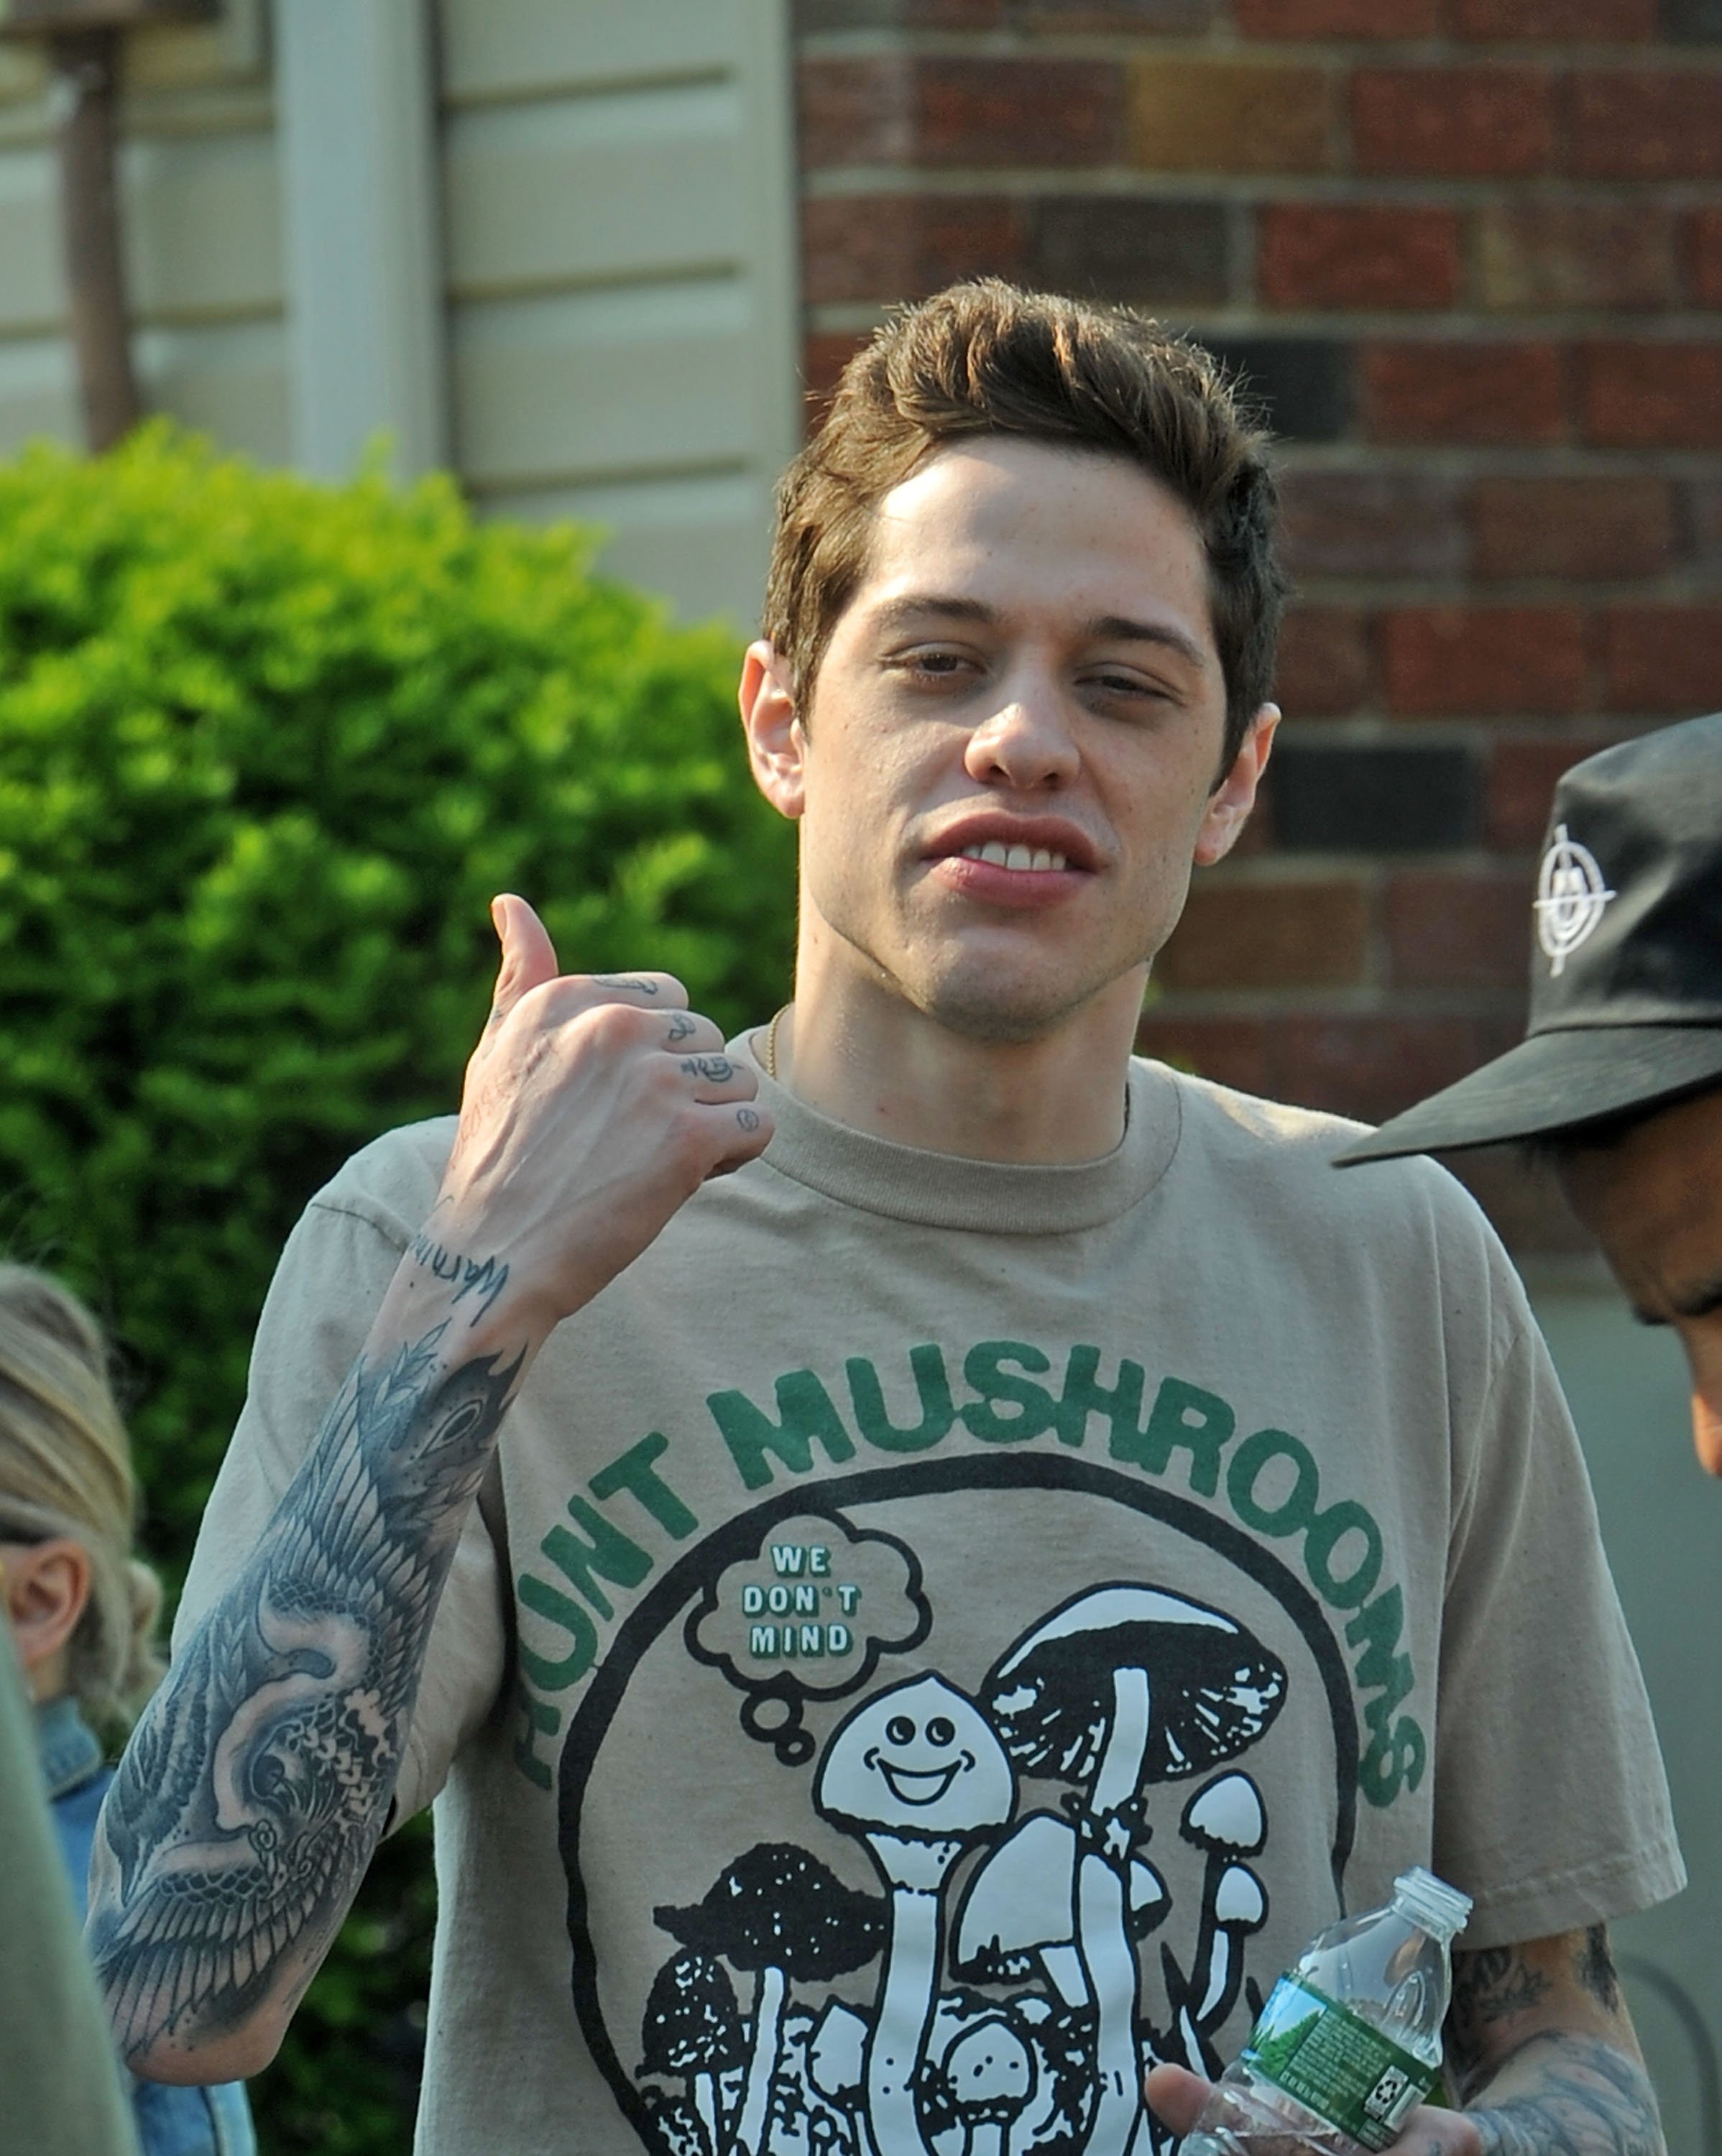 Pete Davidson on set for "Untitled Judd Apatow/Pete Davidson Project" aka "Staten Island" on June 3, 2019 in New York City. | Source: Getty Images